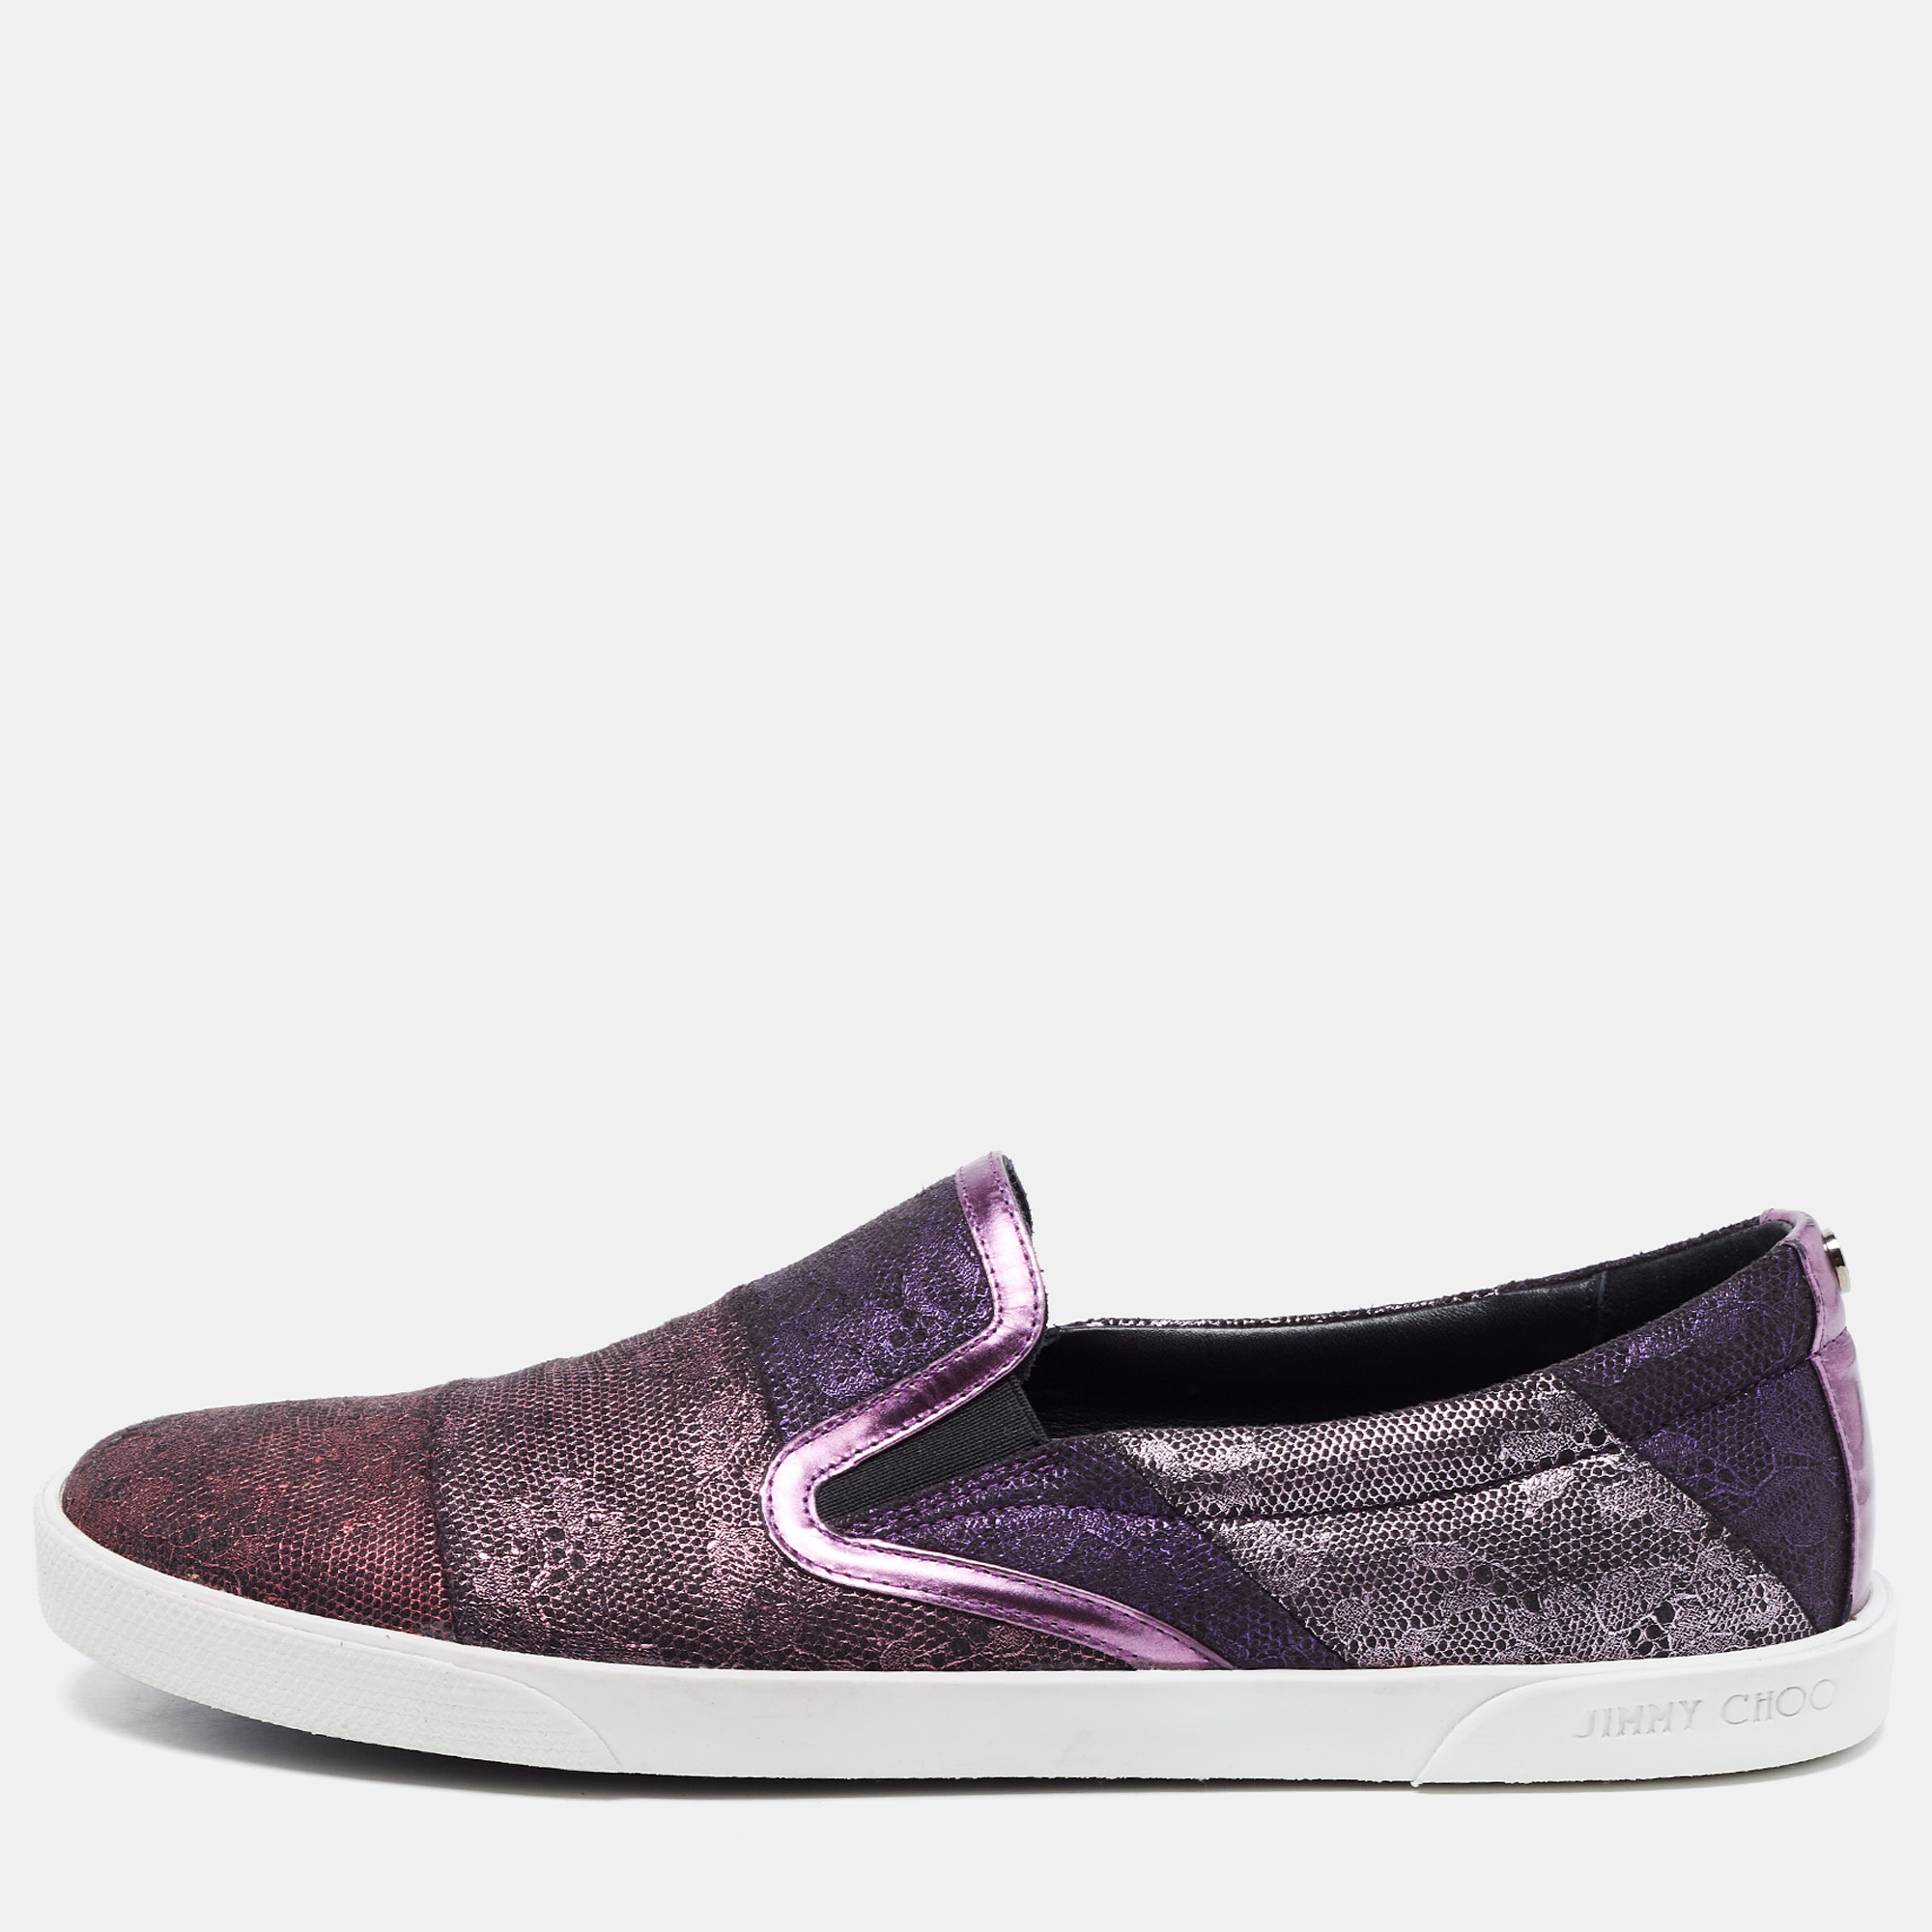 Pre-owned Jimmy Choo Metallic Purple Lace Embroidered Leather Demi Slip On Trainers Size 40